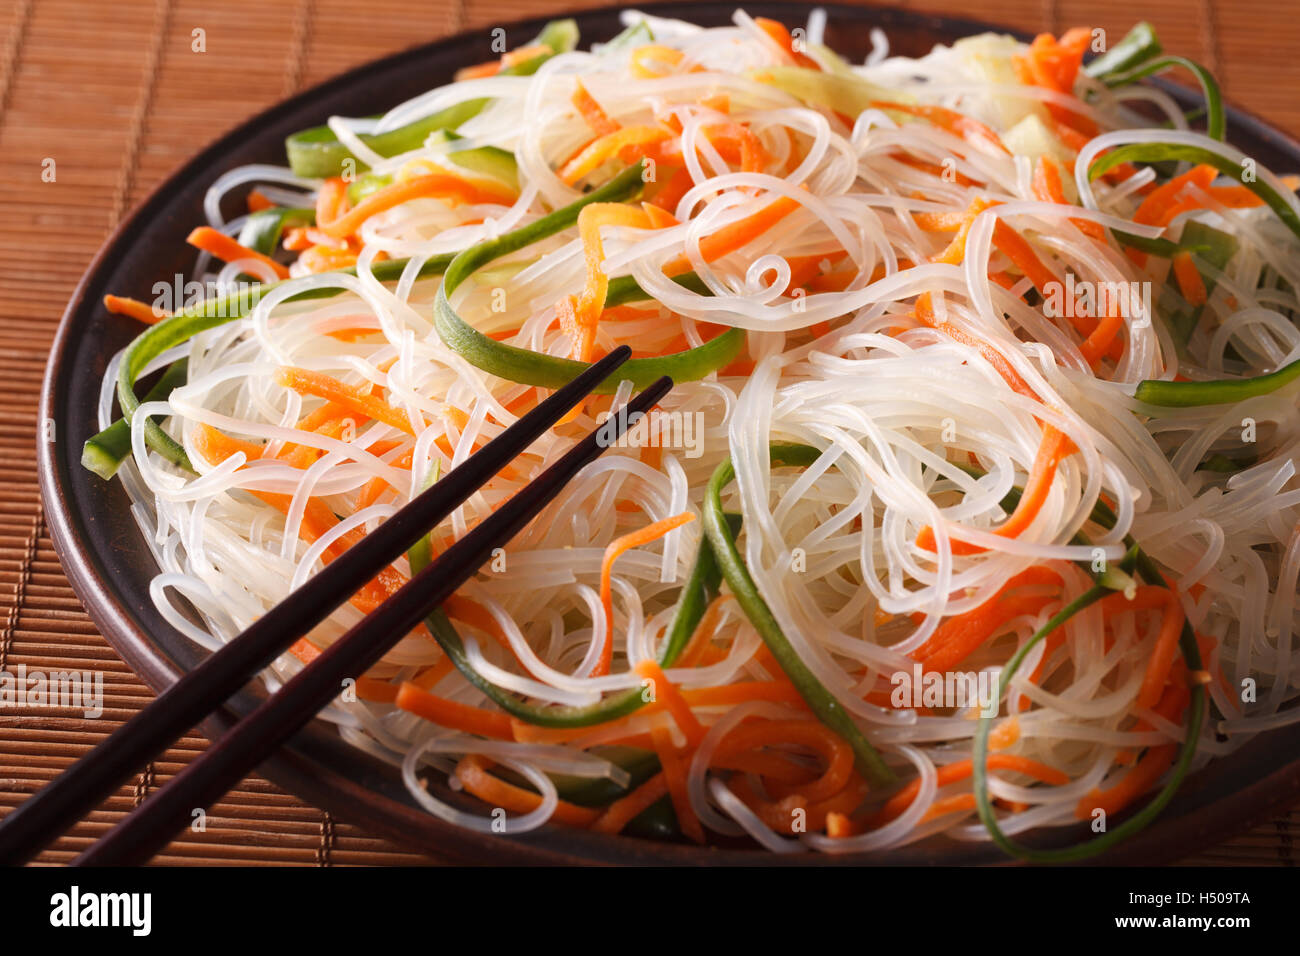 bean thread noodles salad with cucumber and carrot on a plate close-up. Horizontal Stock Photo